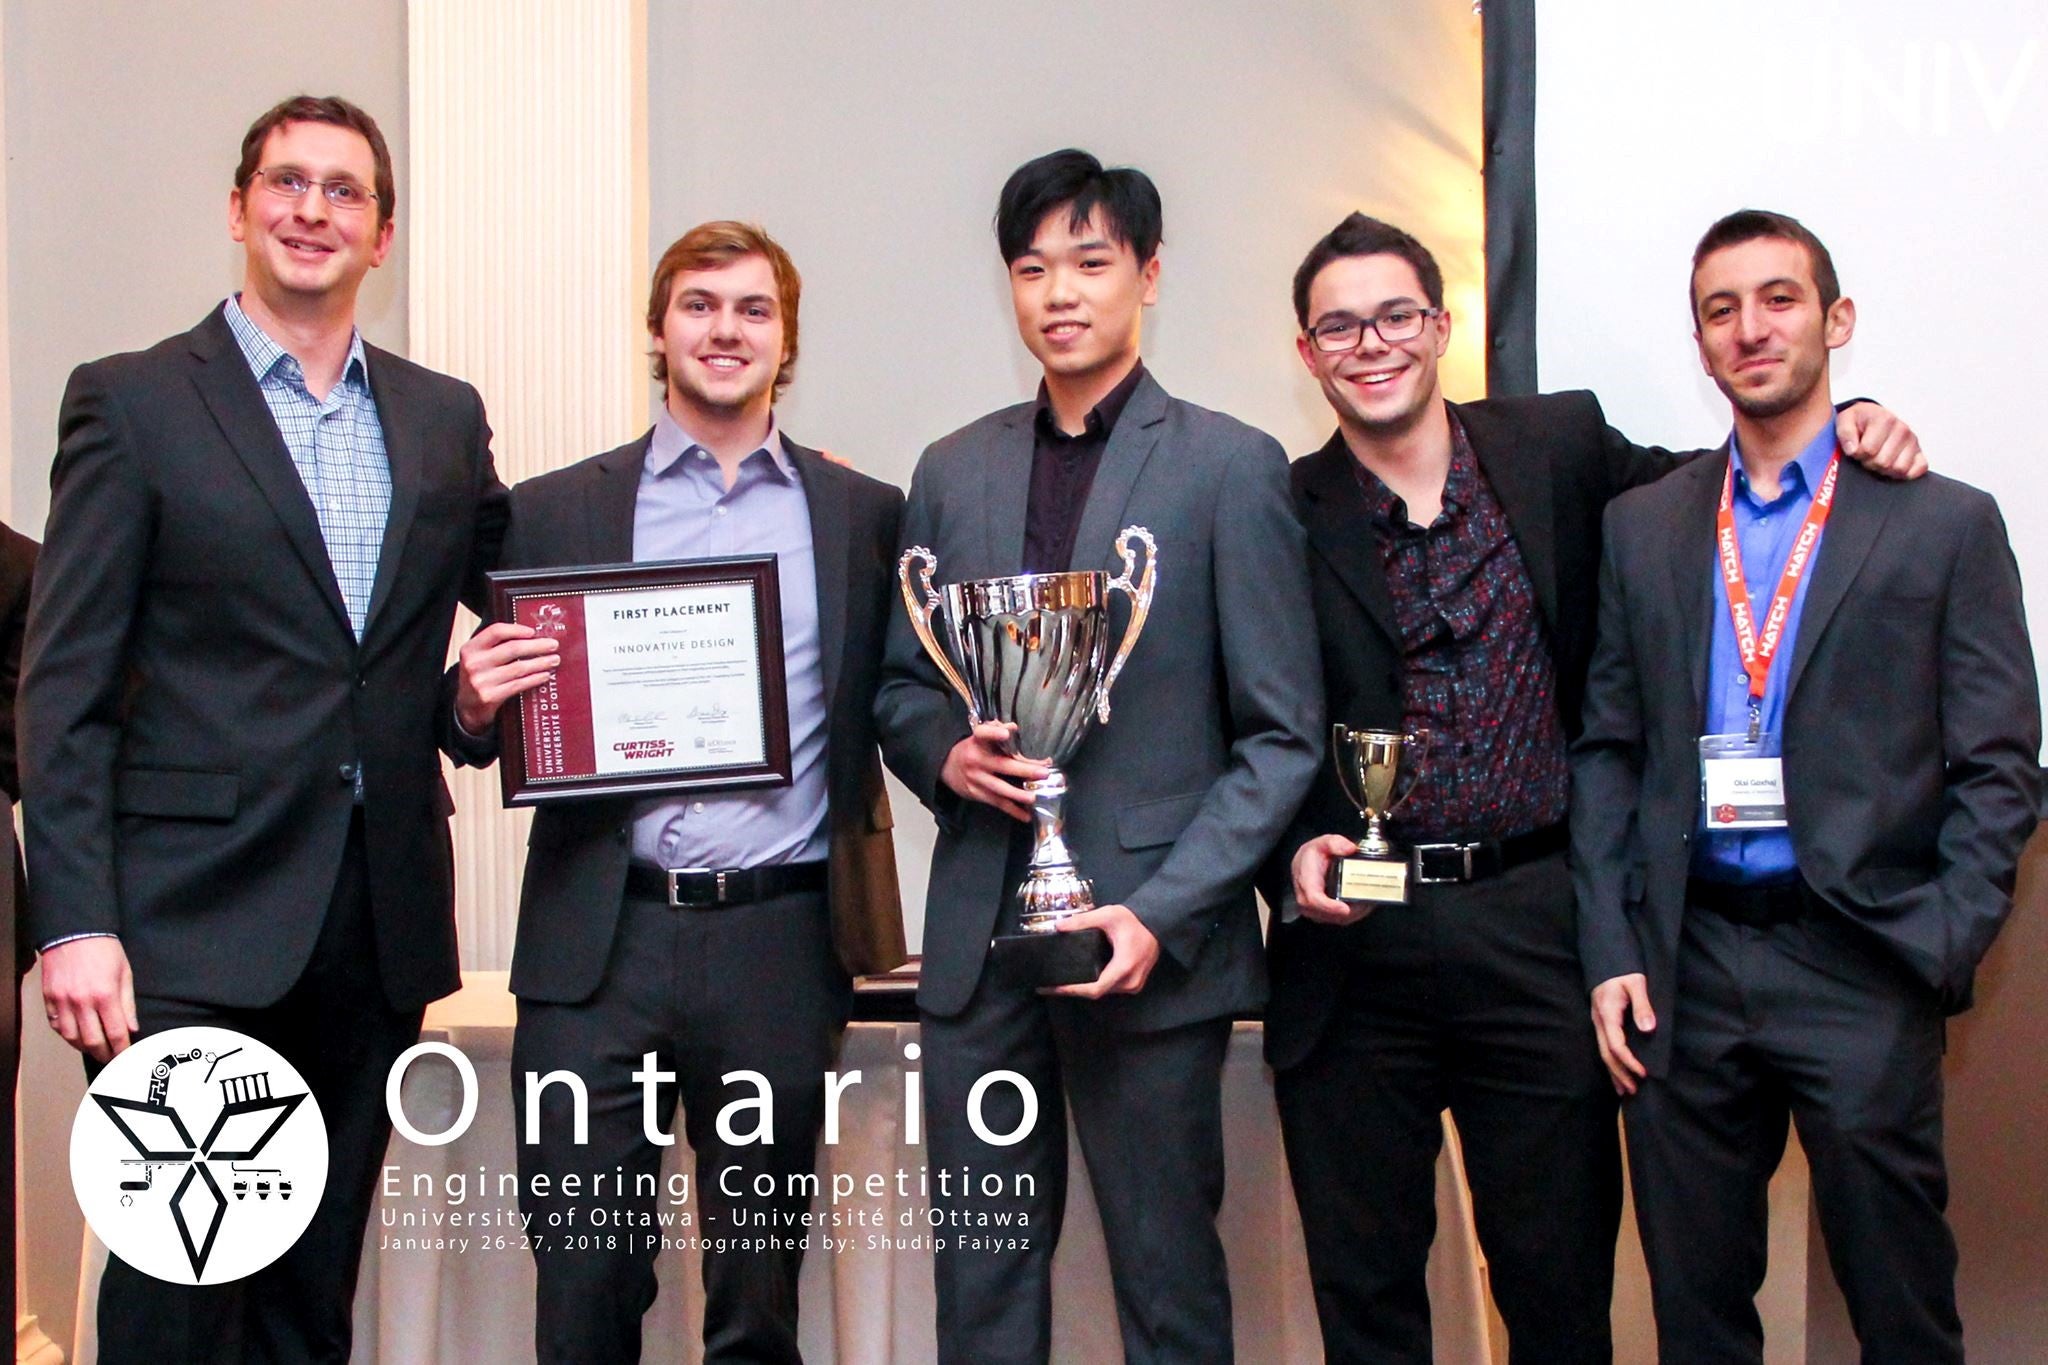 Green Sorbs team poses with Ontario Engineering Competition judge